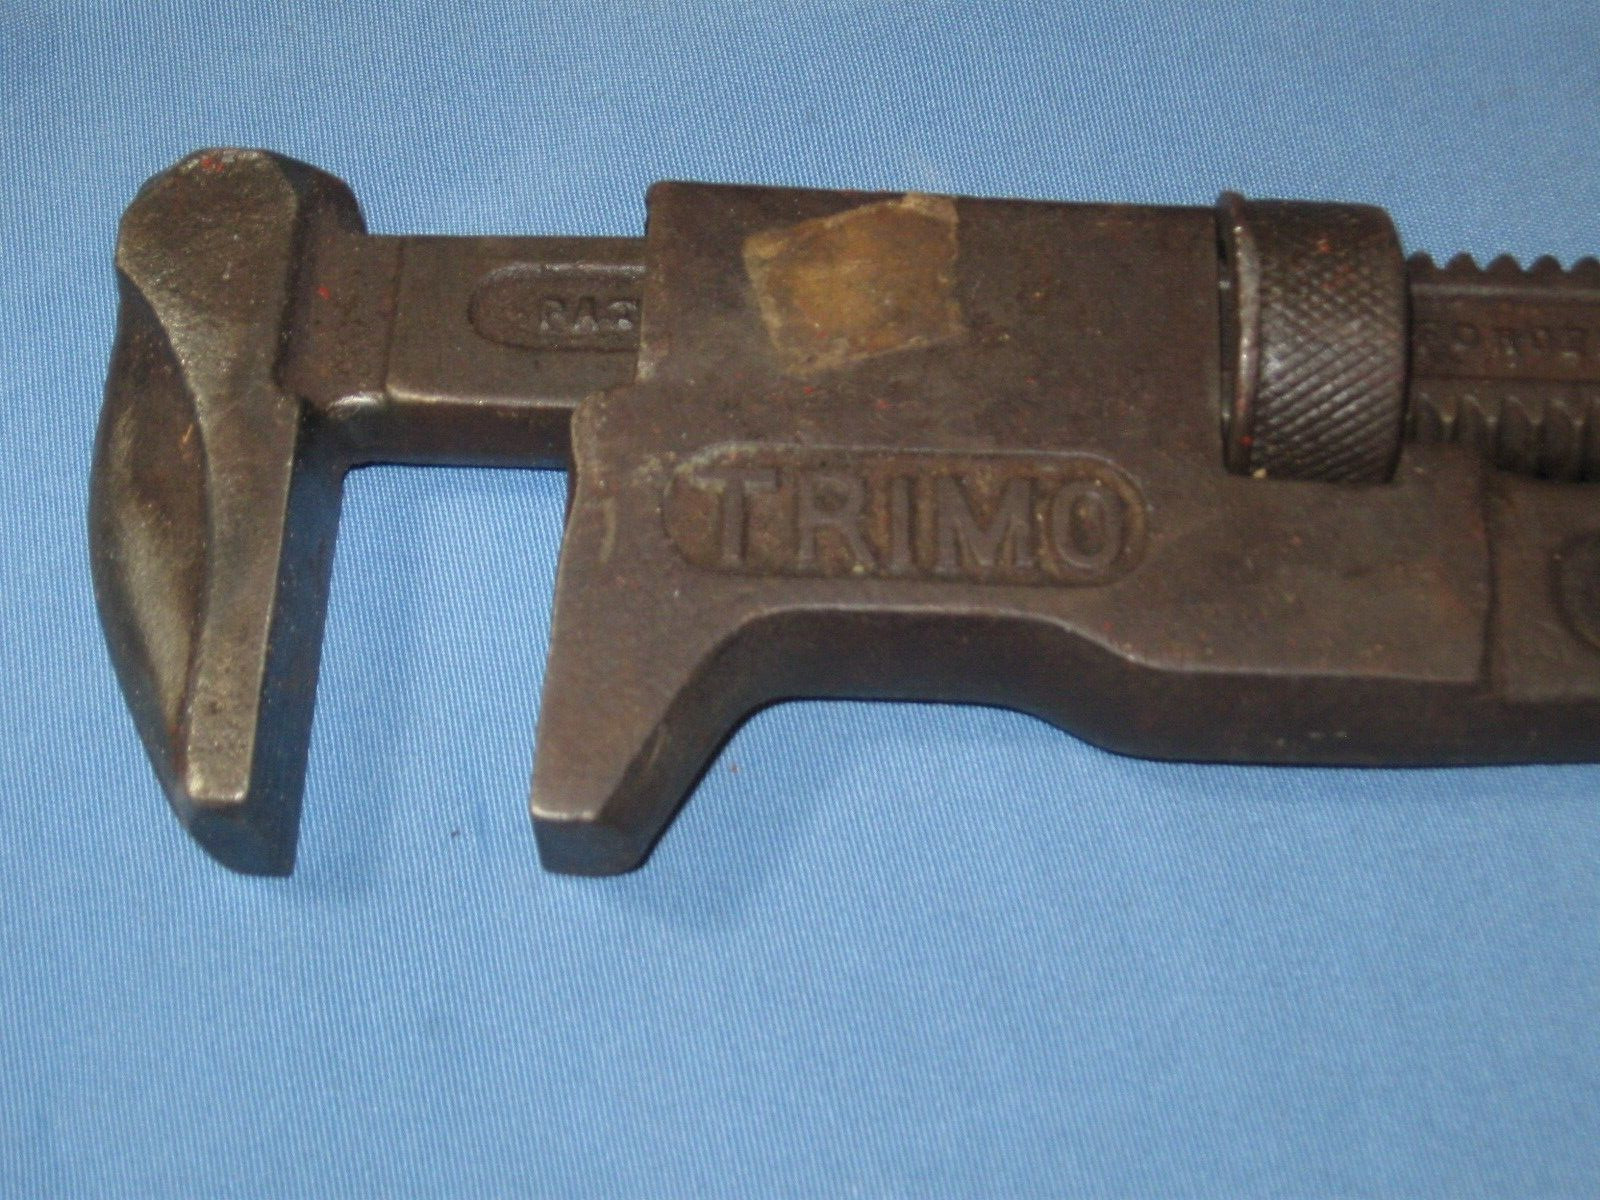 Vintage  15 inch Trimo Pipe Spud Monkey Wrench - USA Made Trimont Roxburry Mass.